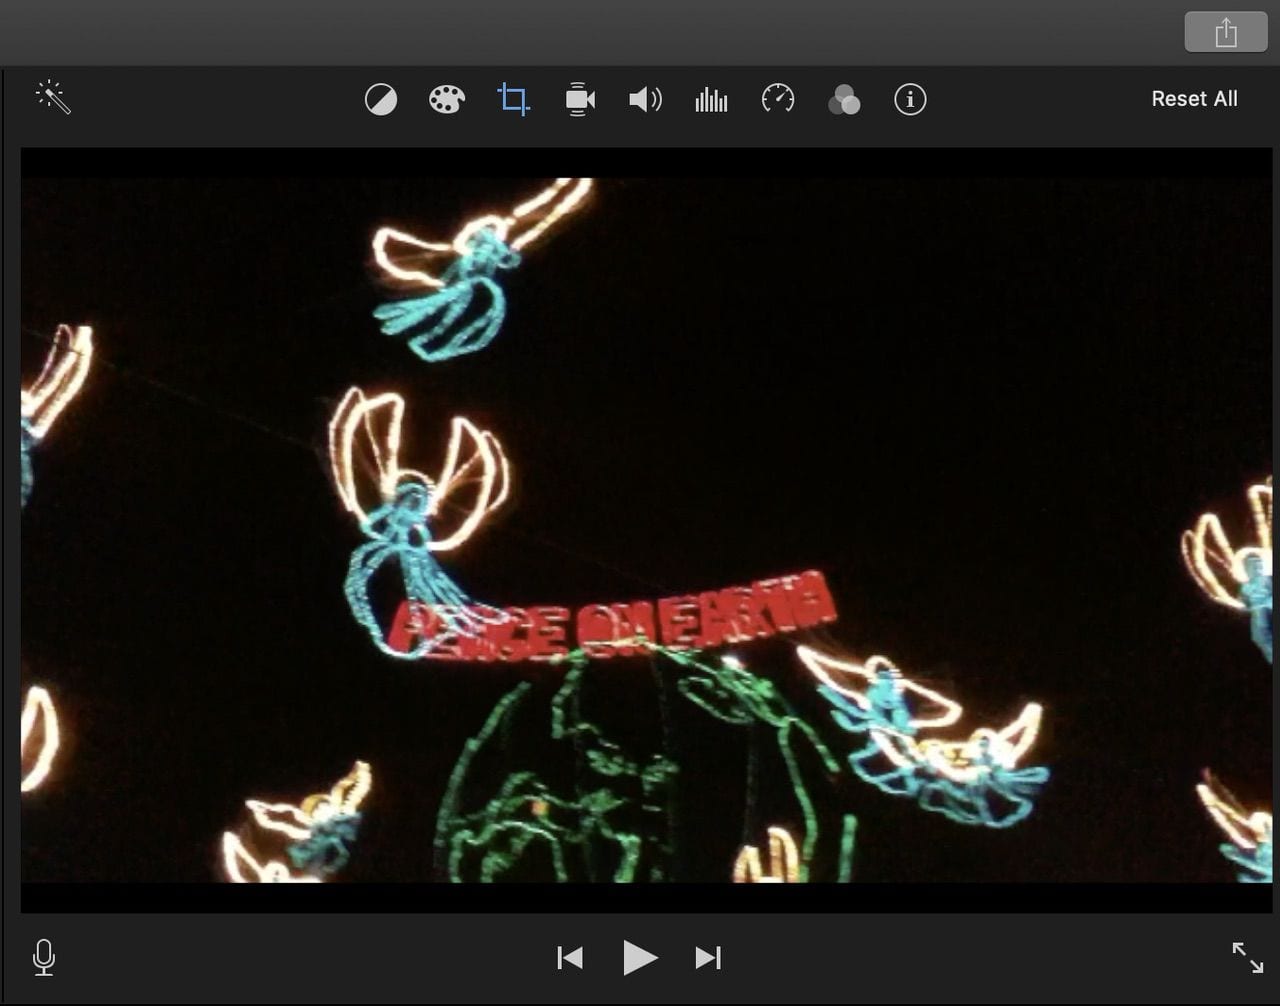 Editing tools to improve your video or photos are located just above the preview window.